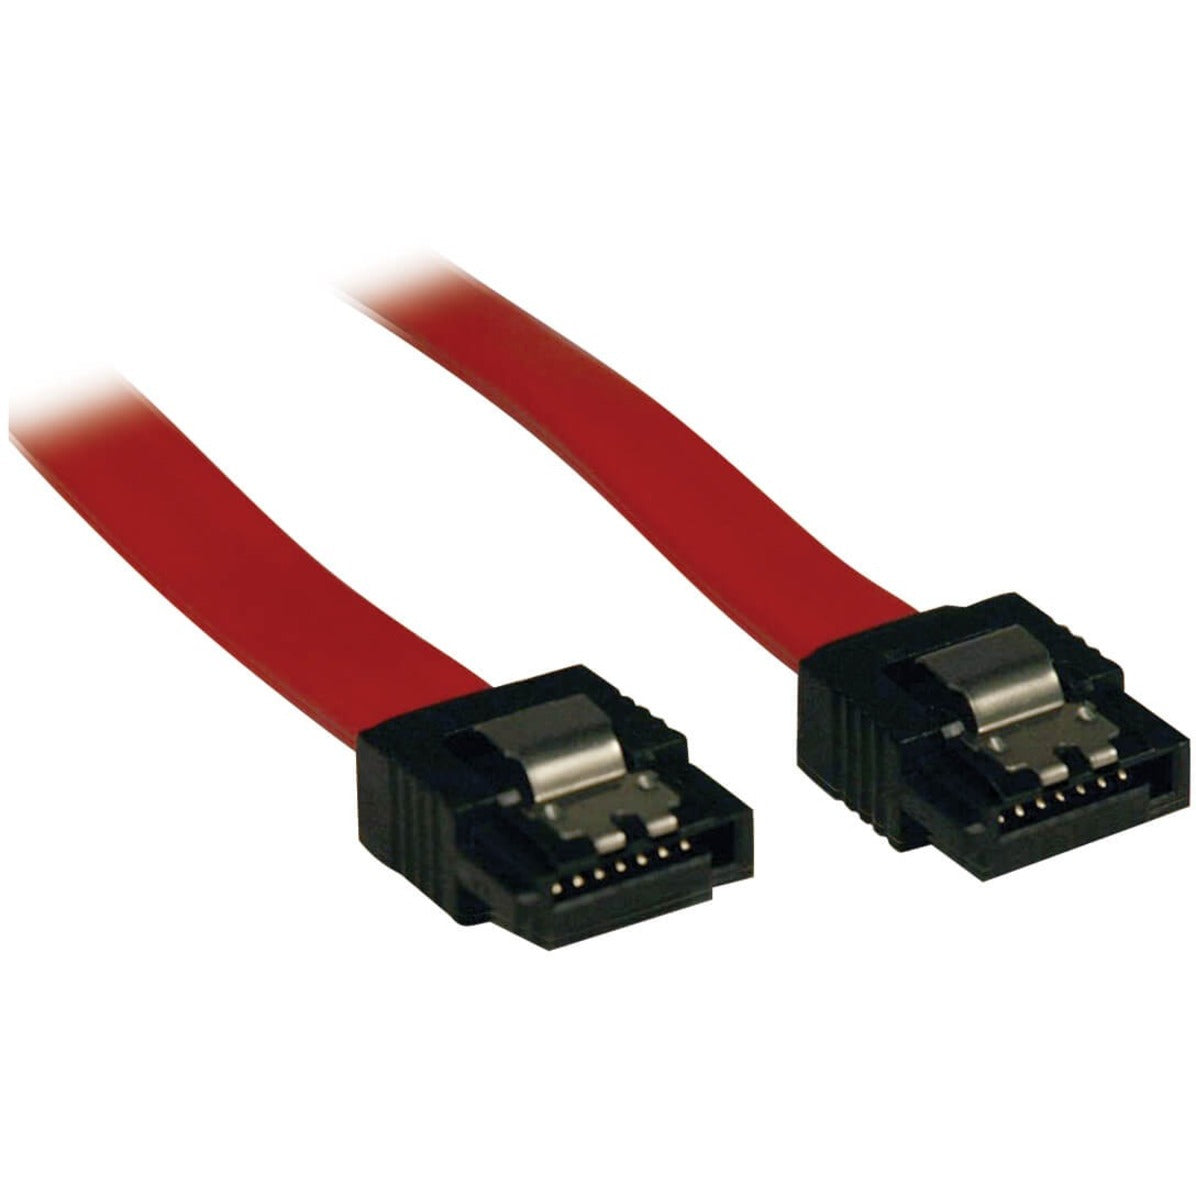 Tripp Lite P940-12I Serial ATA (SATA) Latching Signal Cable 12-in., EMI/RF Protection, 6 Gbit/s